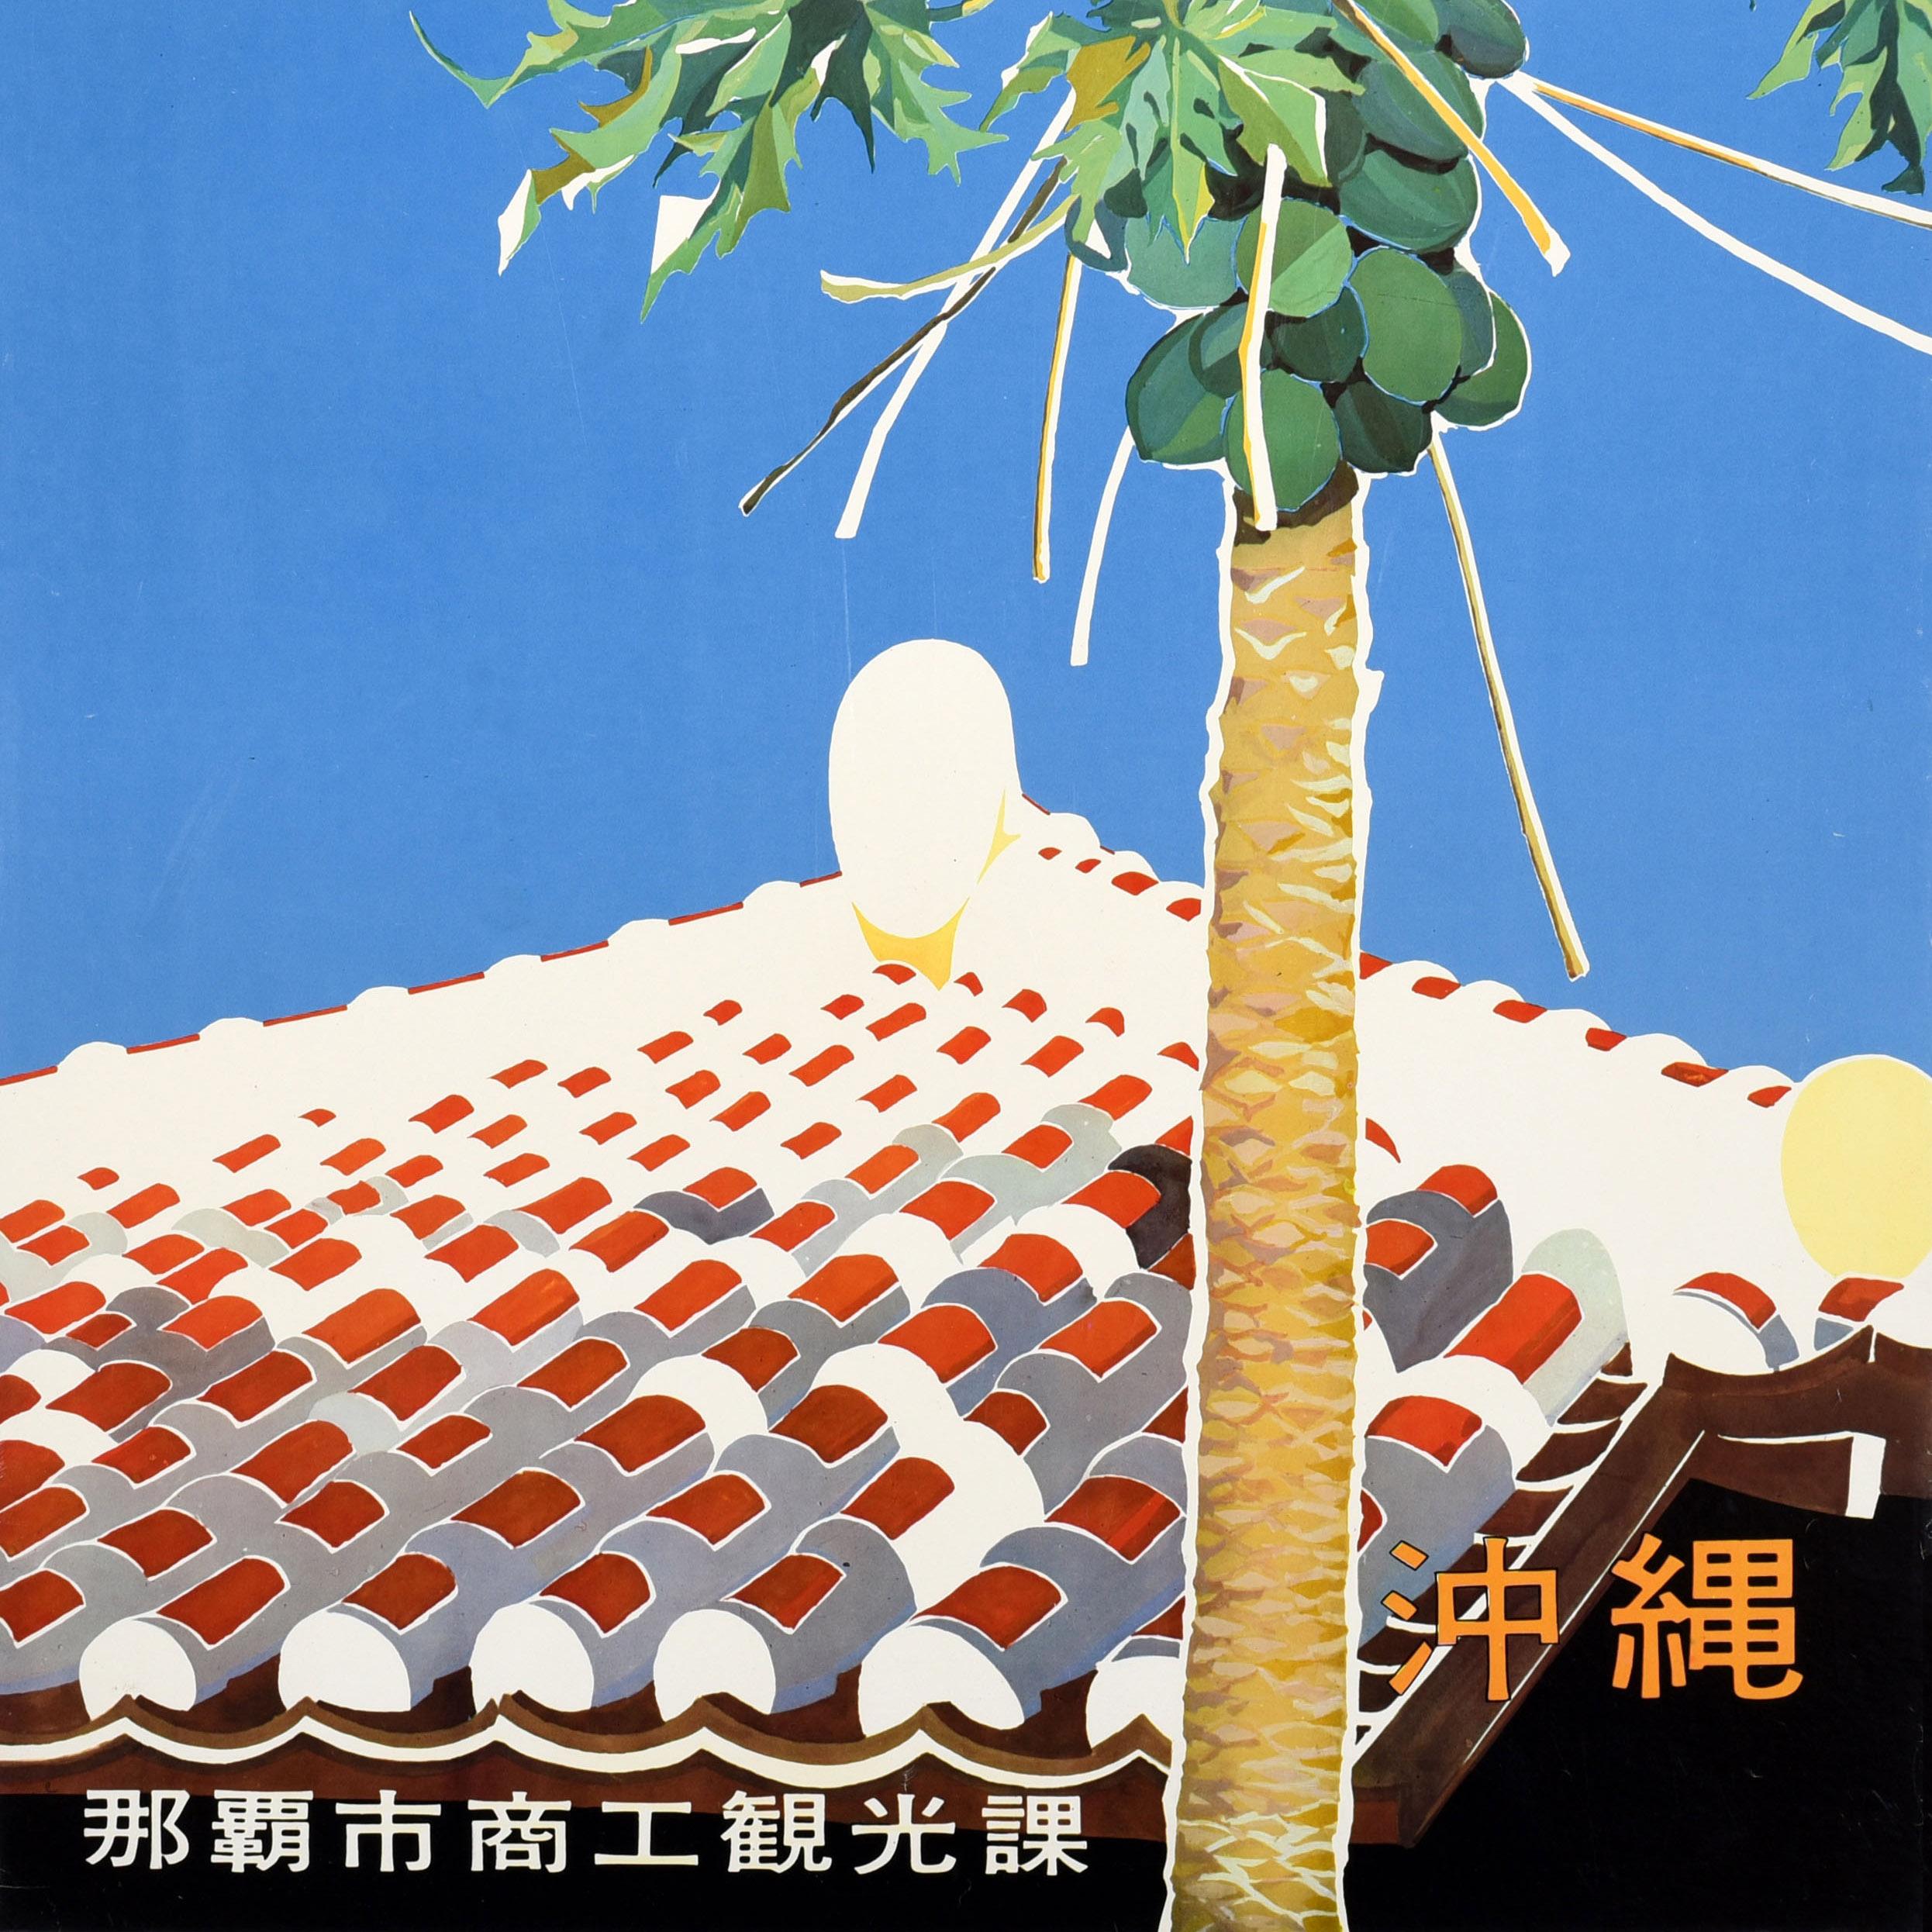 Original Vintage Asia Travel Poster Okinawa Naha City Shuri Castle Japan Papaya In Good Condition For Sale In London, GB